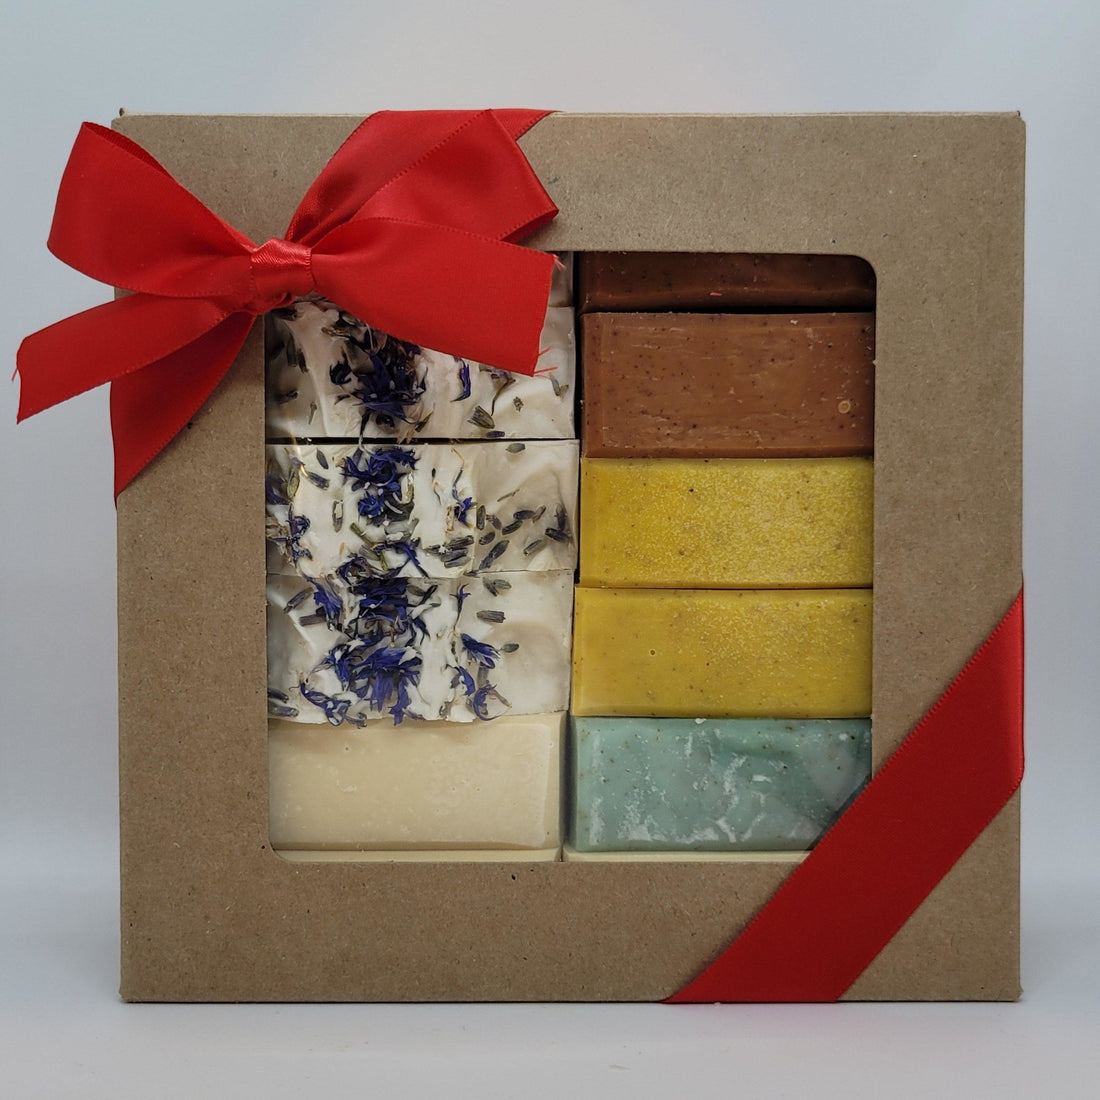 Send the Best Quality Gift Box For Your Loved Ones - Steel & Saffron Bath Boutique Inc.